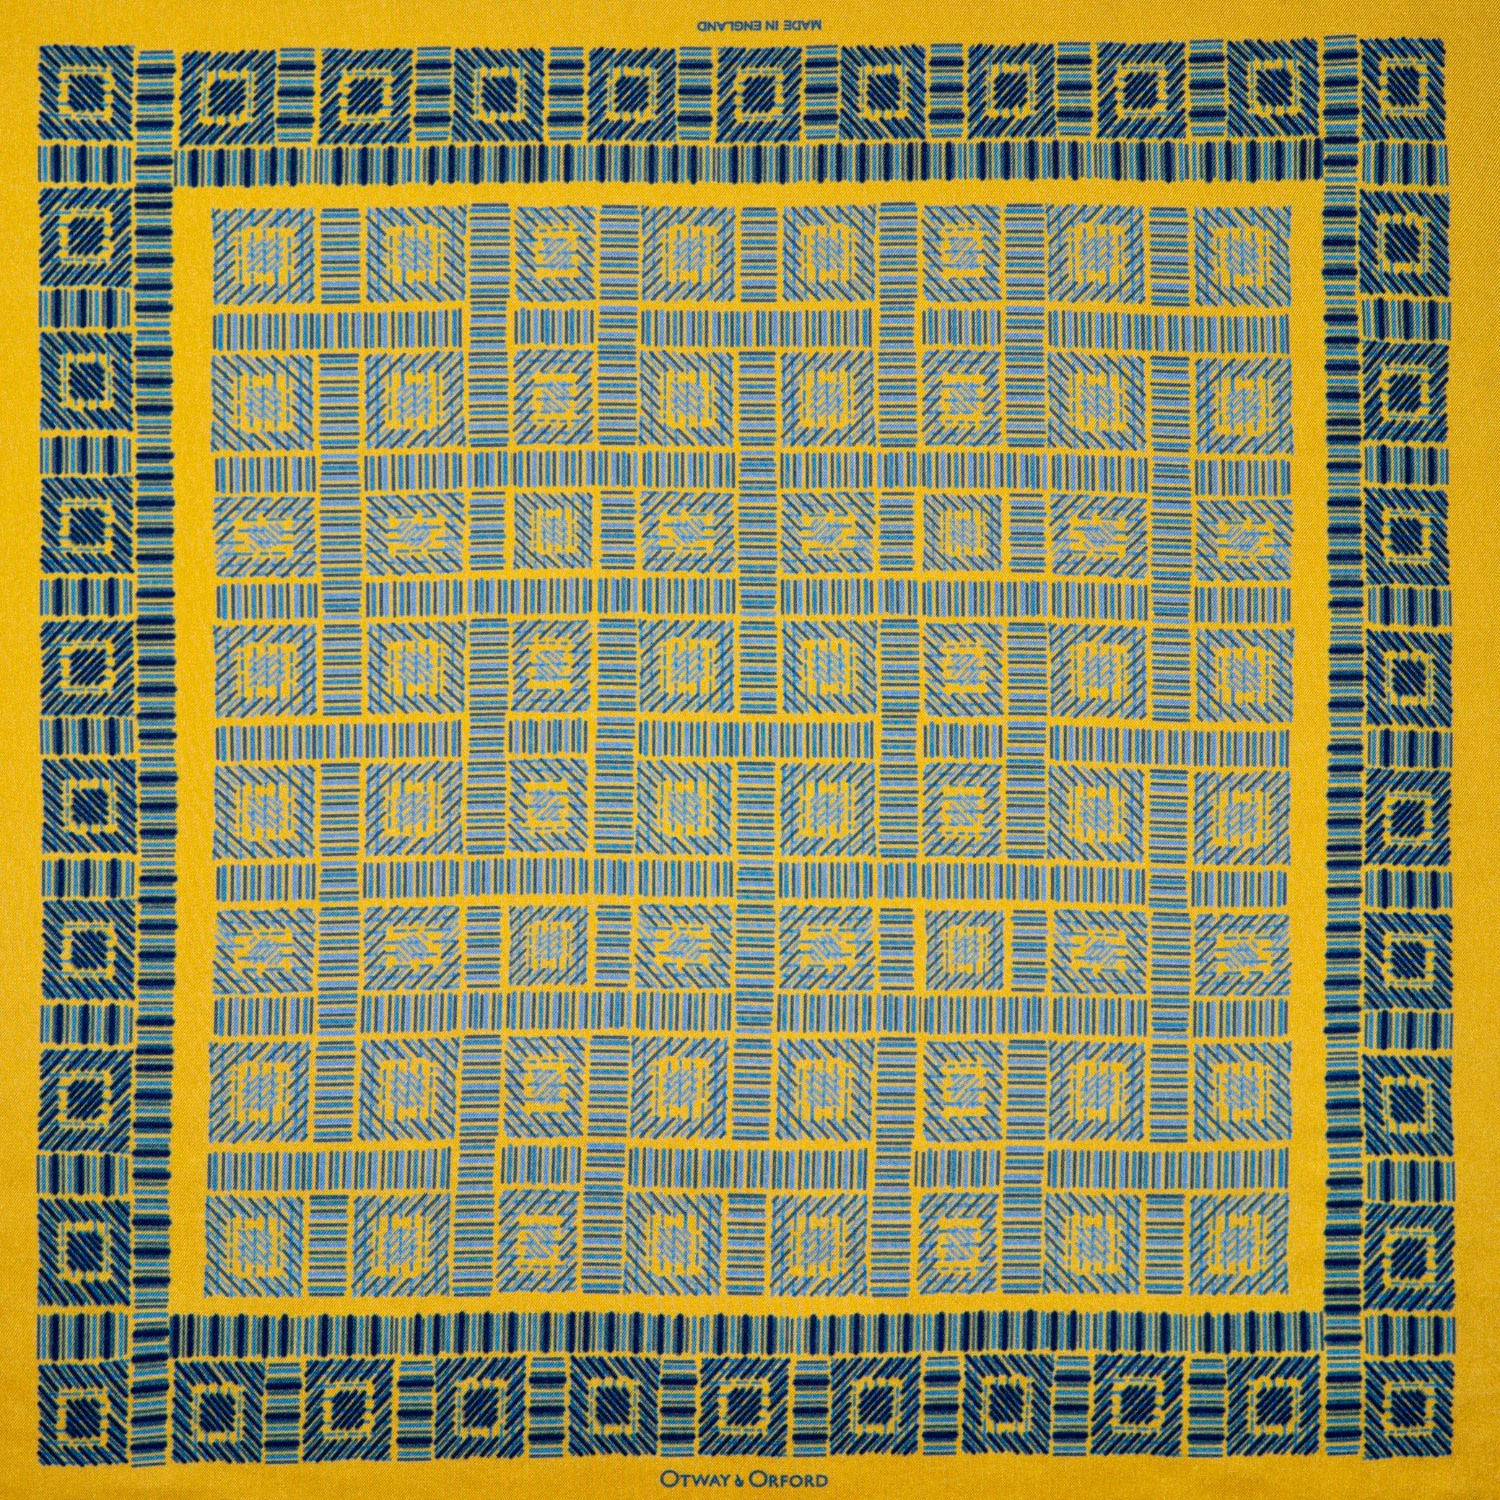 Men’s Gold / Blue ’City Squares’ Geometric Silk Pocket Square In Gold With Blue. Full-Size. Otway & Orford